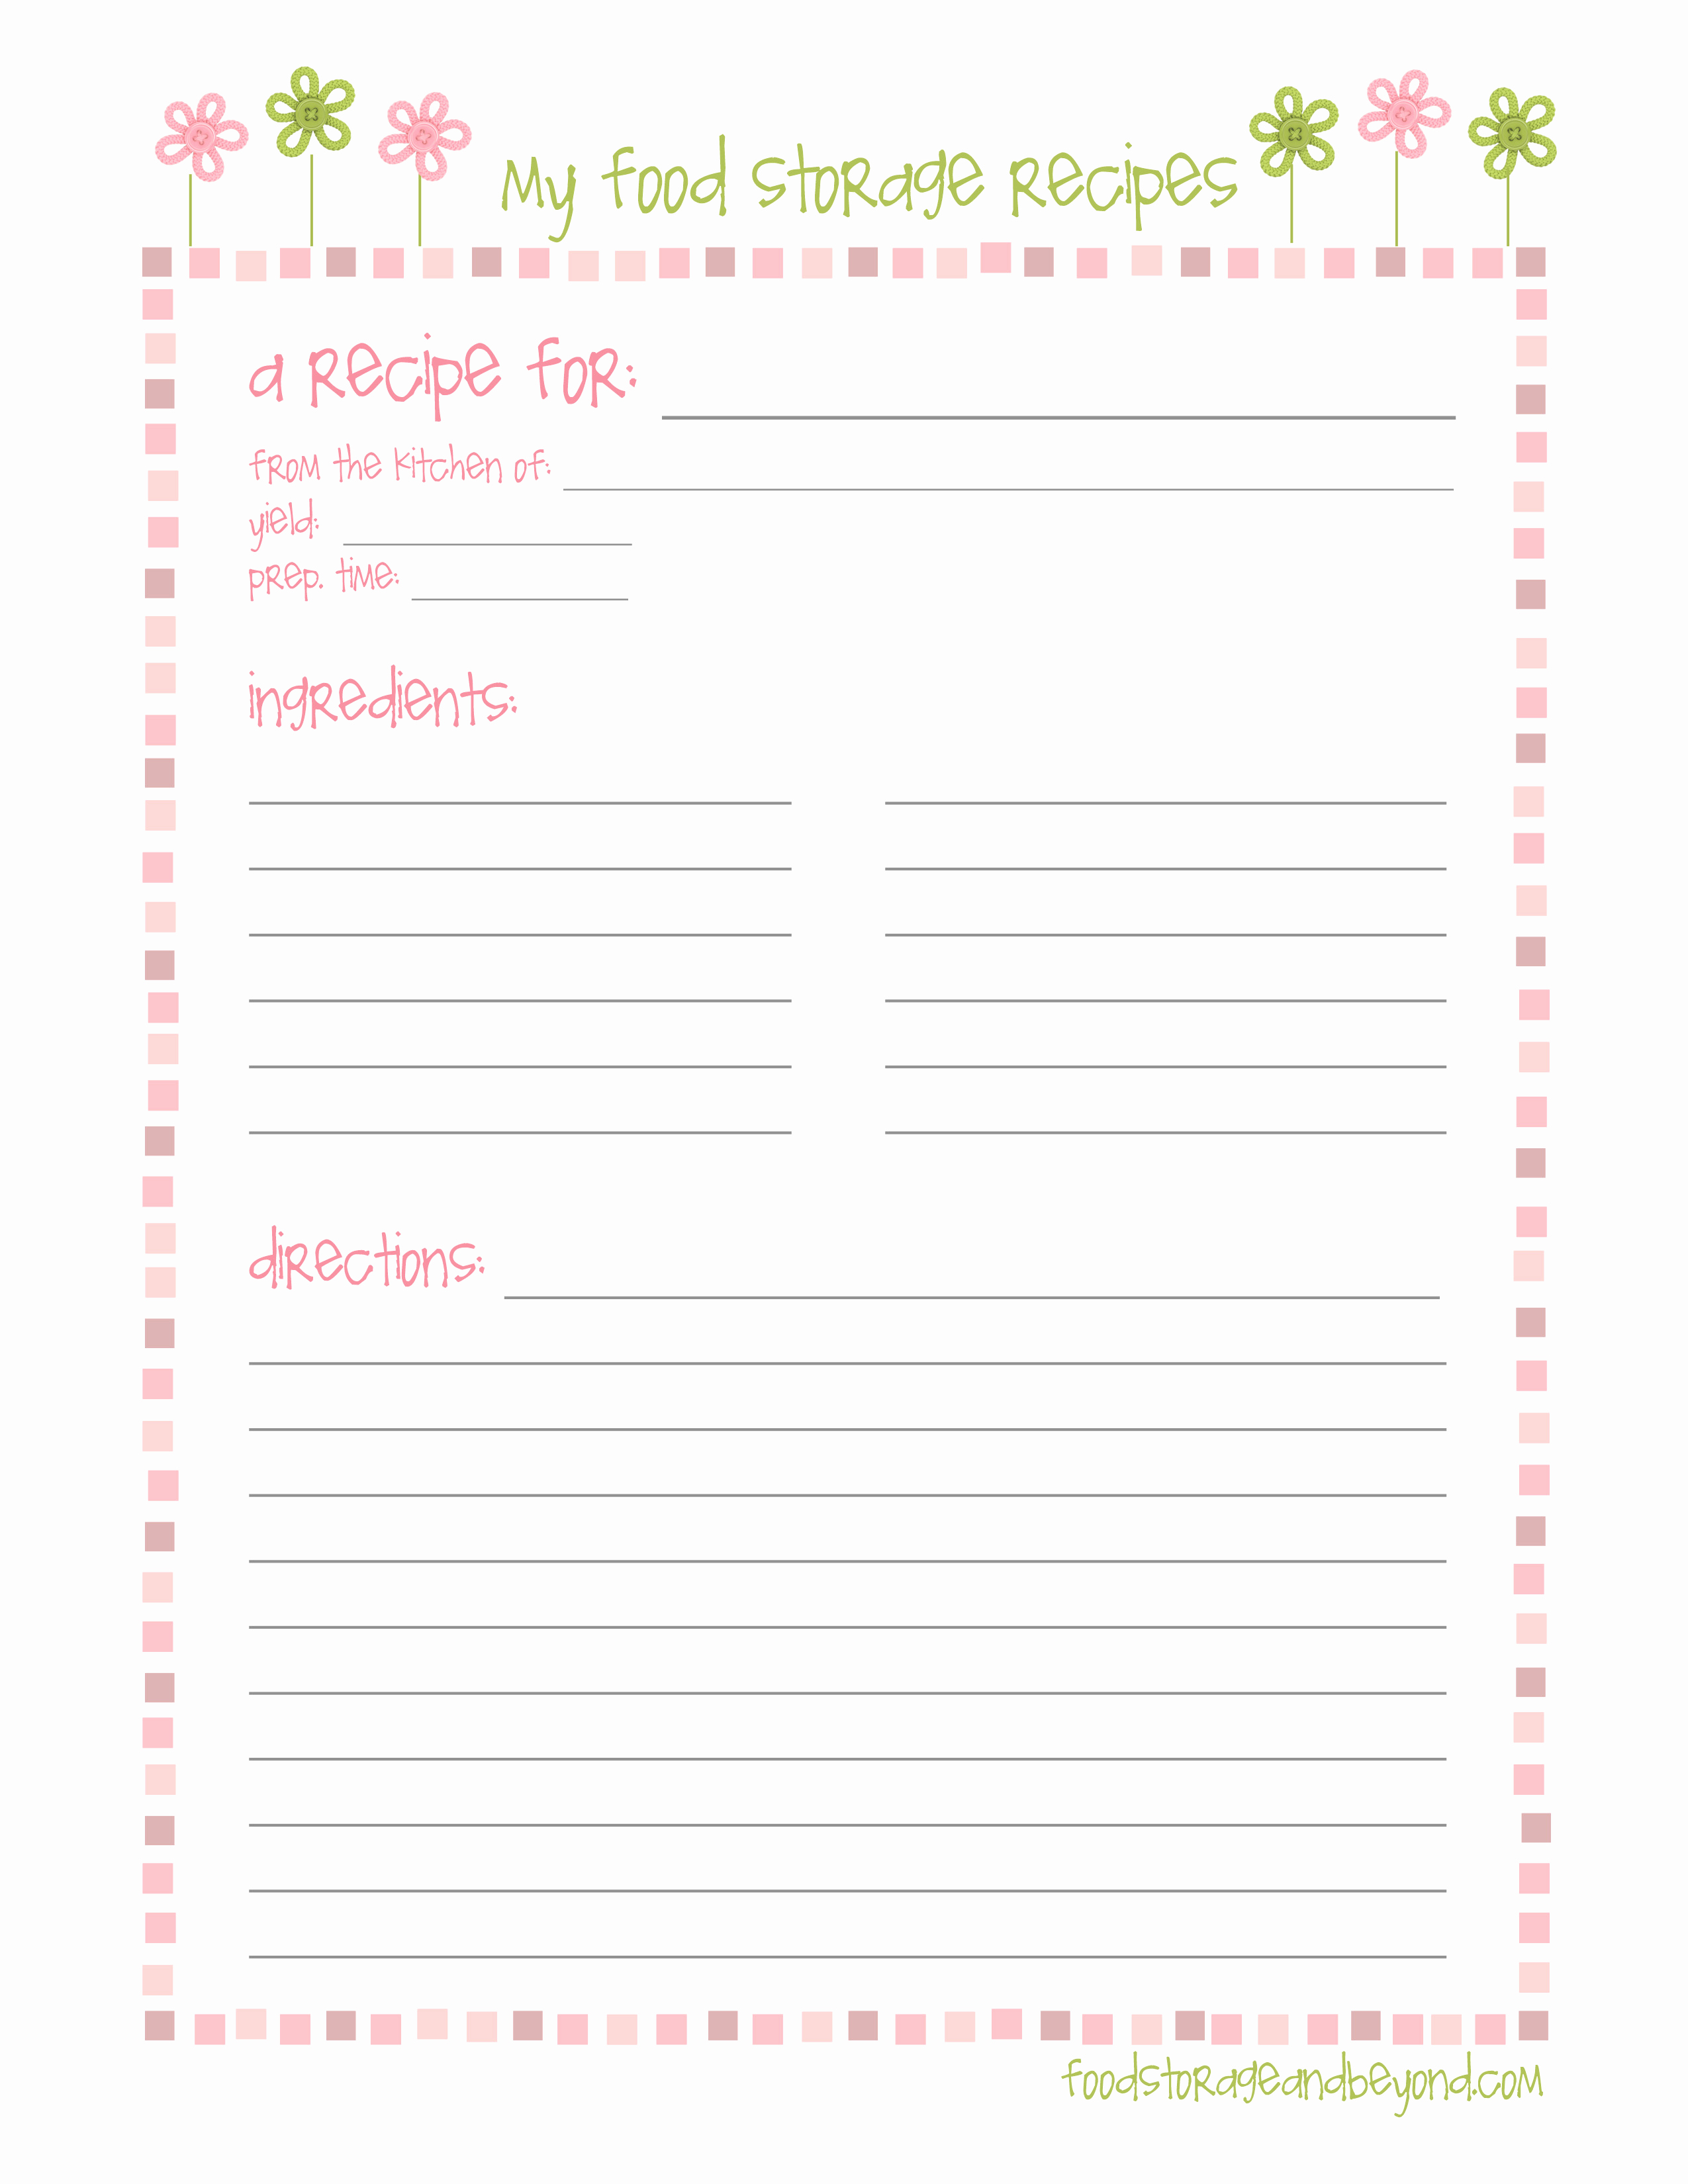 Recipe Card Templates for Word Awesome Recipe Cards – Food Storage and Beyond